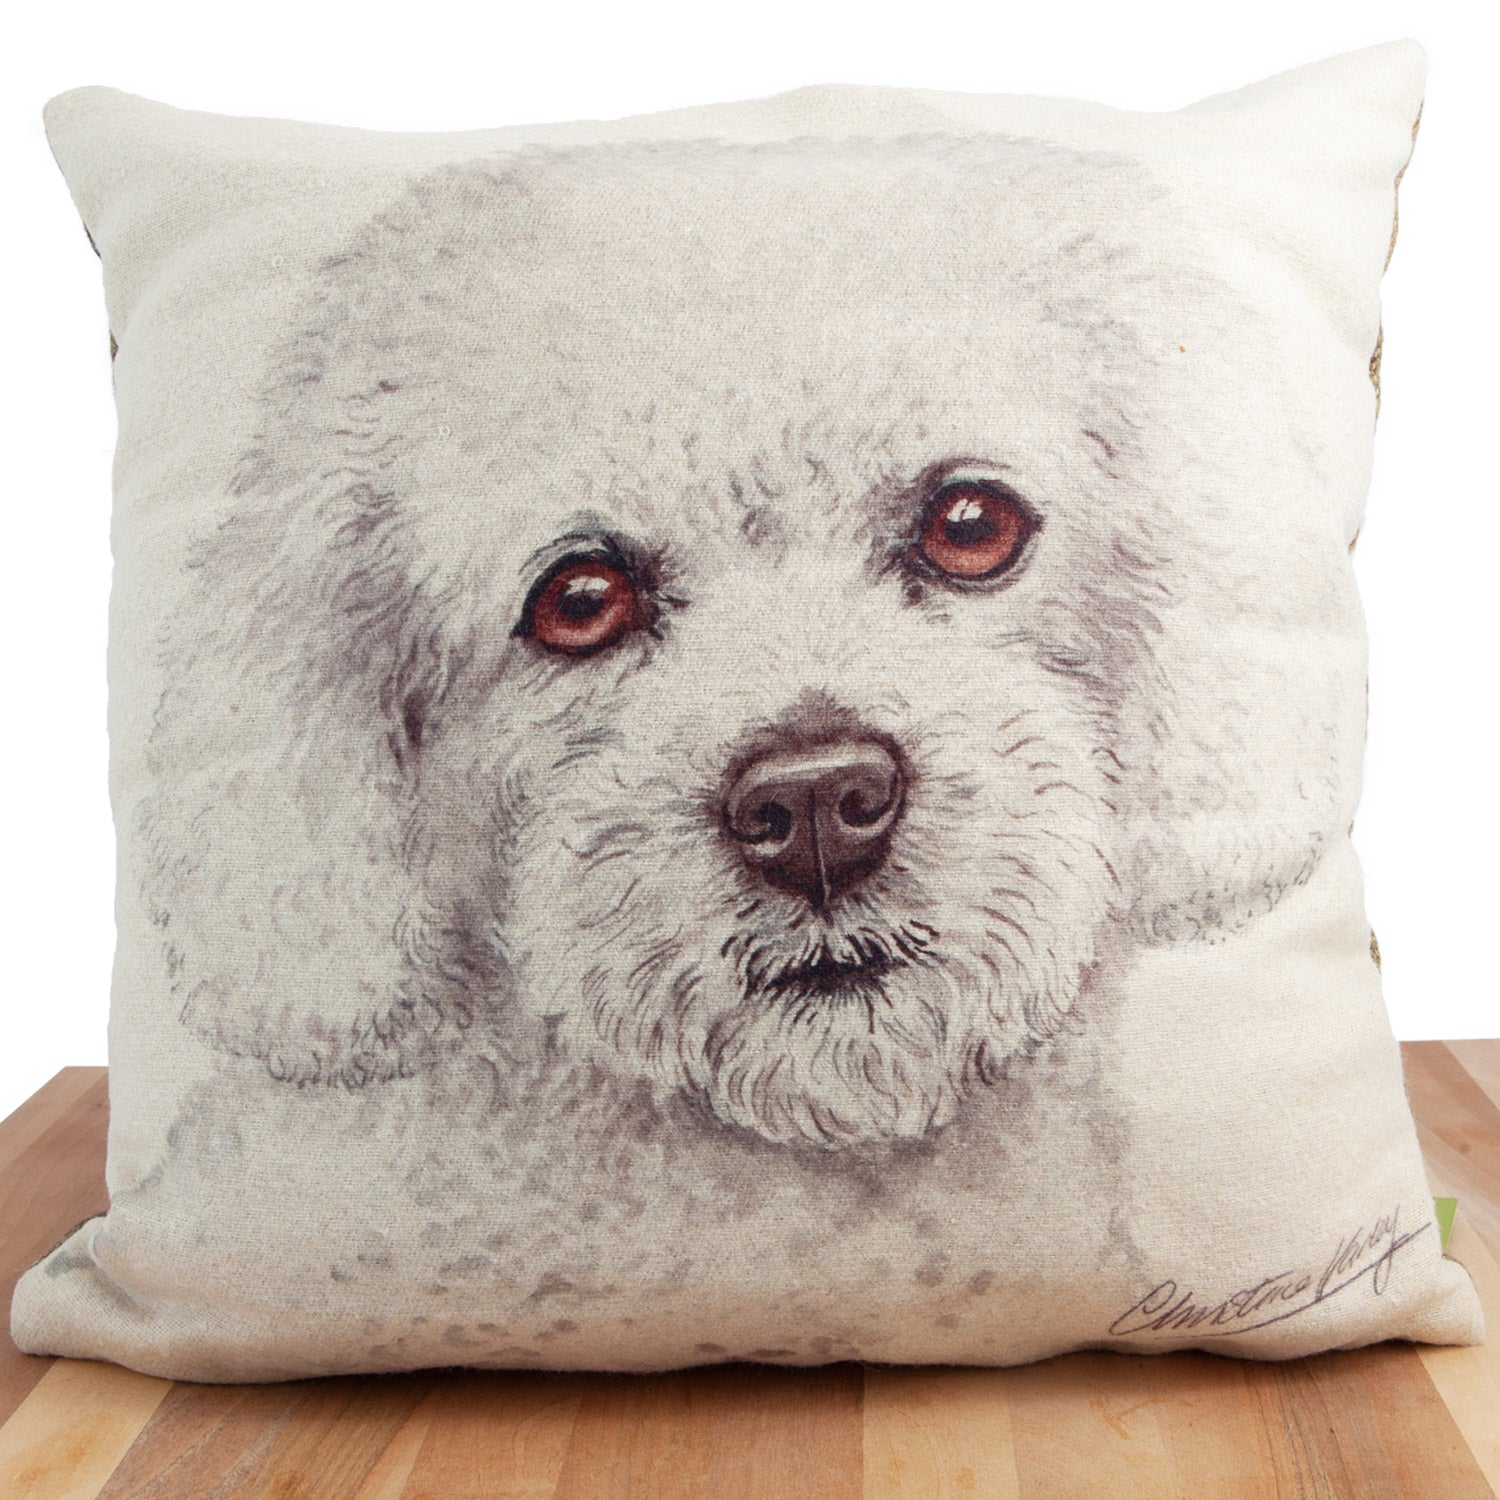 Dog Lover Gifts available at Dog Krazy Gifts. Bichon Frise Cushion, part of our Christine Varley collection – available at www.dogkrazygifts.co.uk